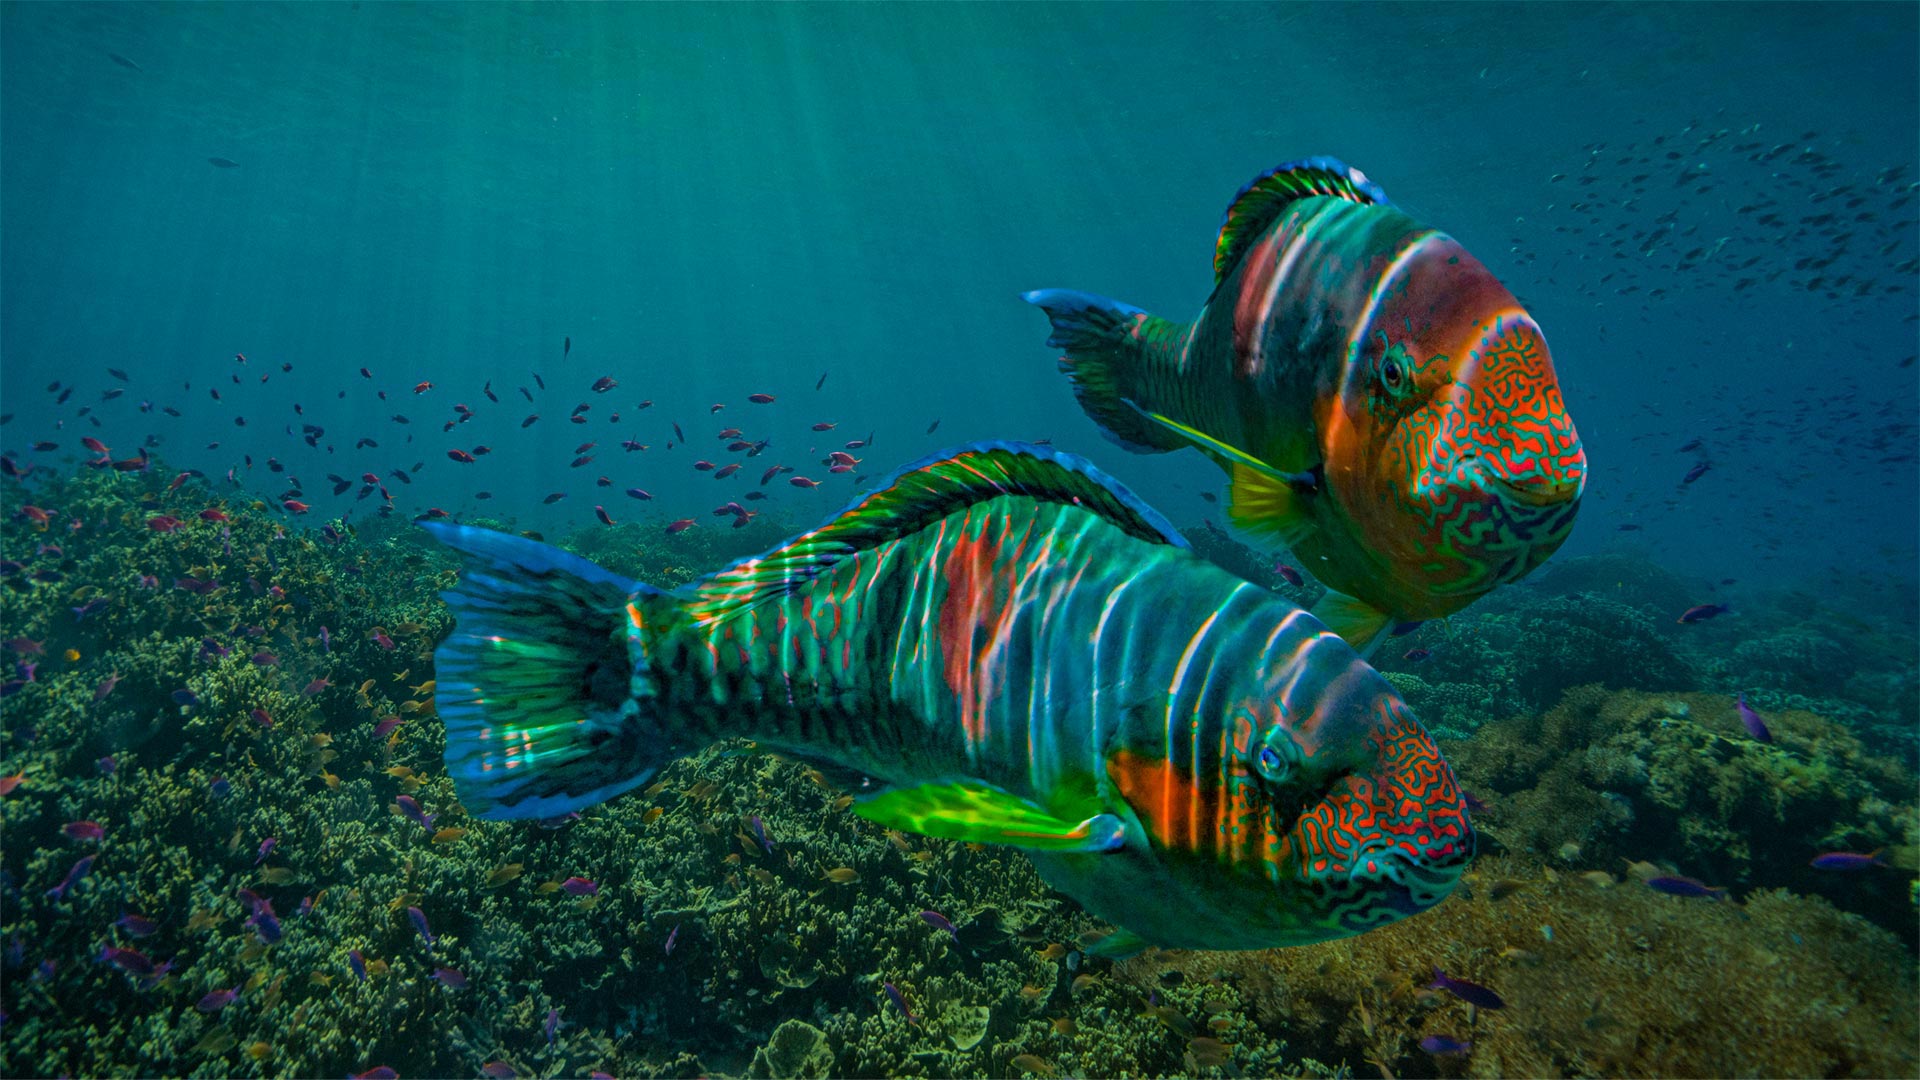 Parrotfish off the coast of Negros Oriental province in the Philippines - Tim Fitzharris